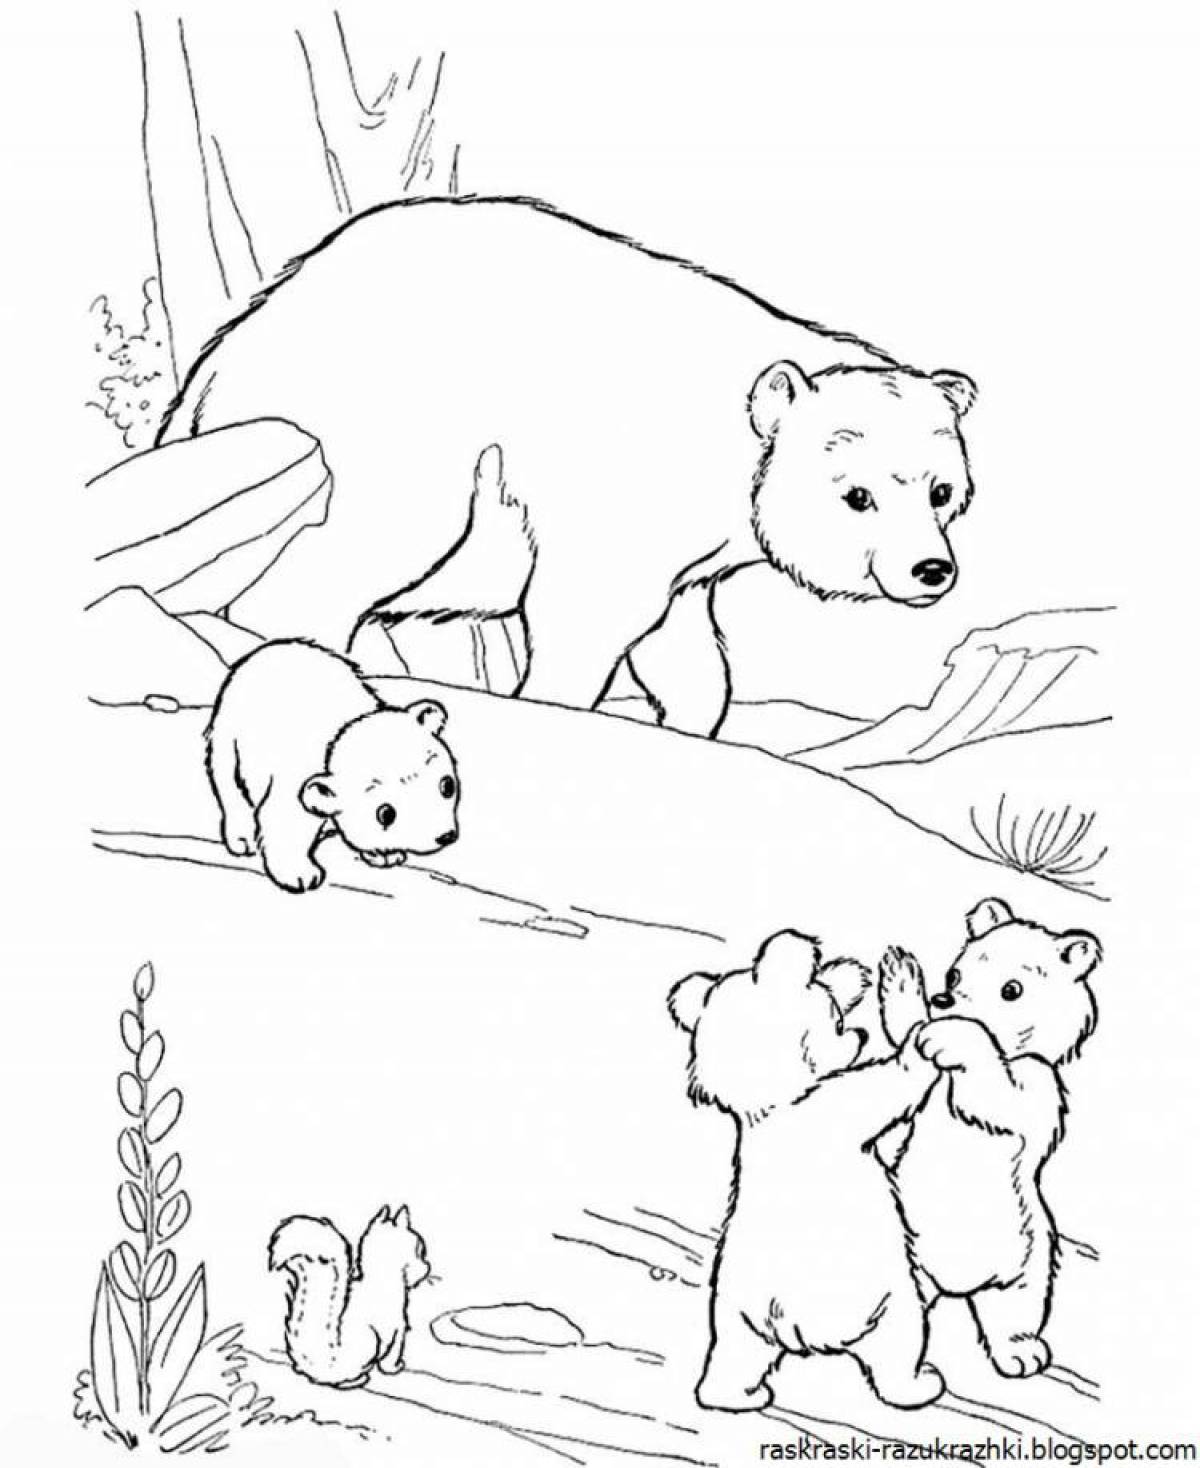 Crazy bear coloring book for kids